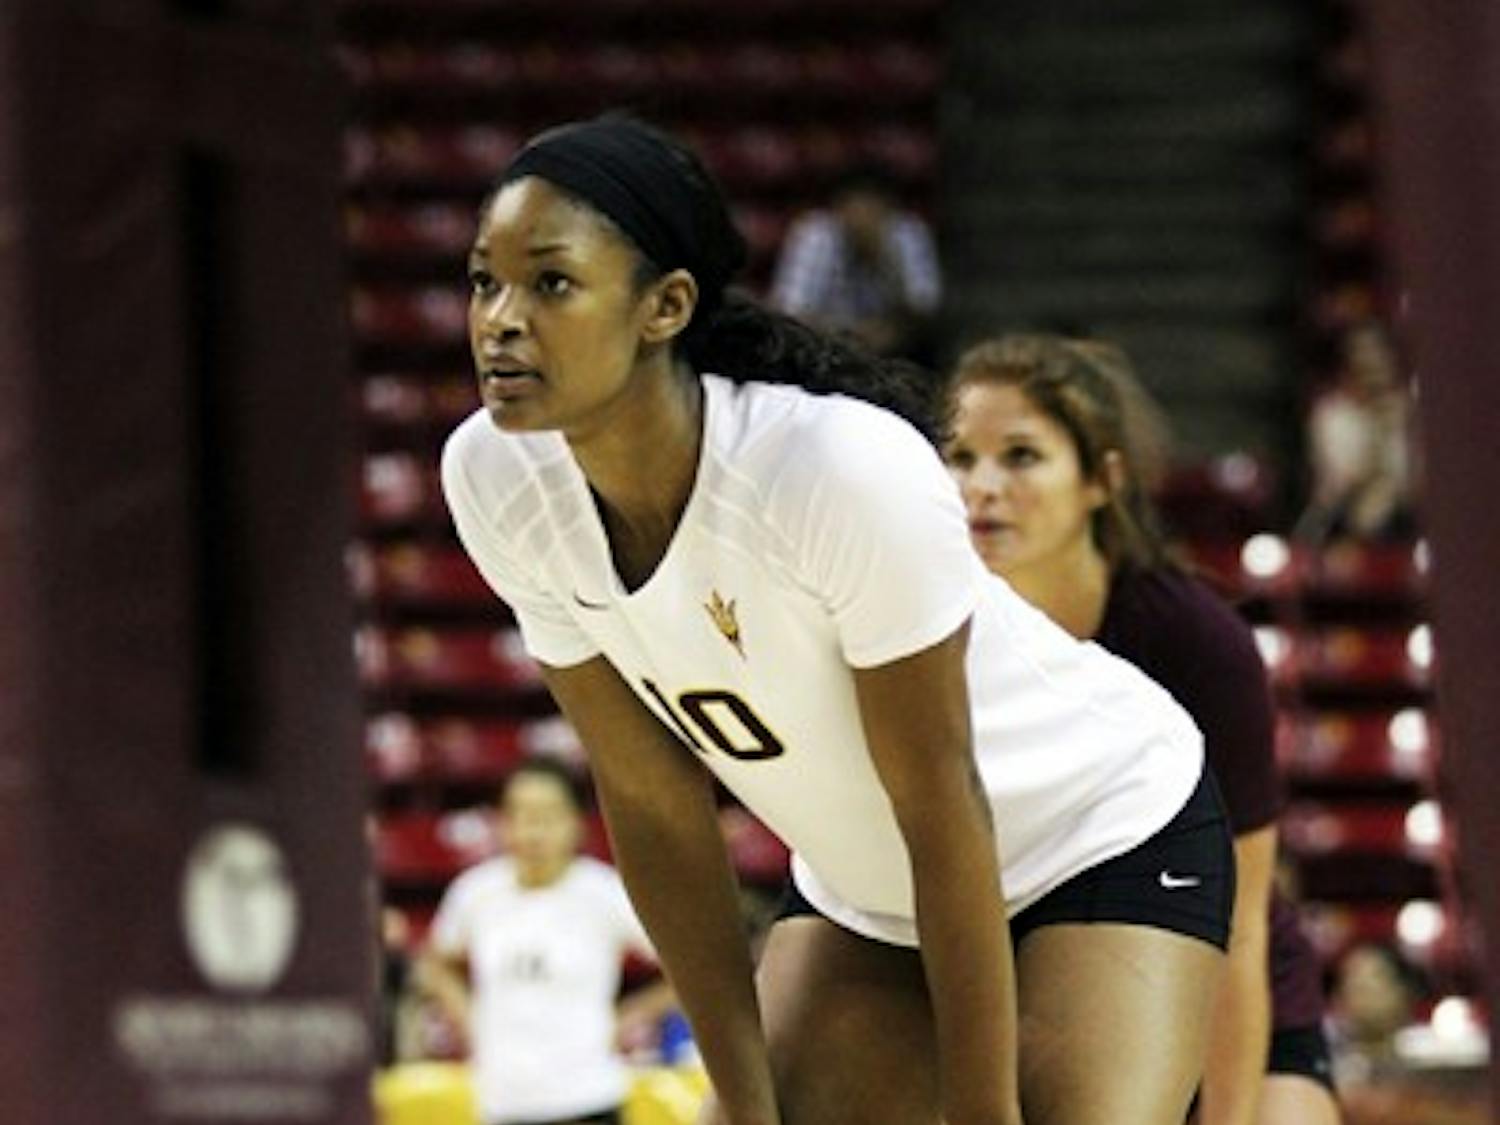 Senior Erica Wilson totaled 522 kills in only her first year as an outside hitter, placing her fifth all-time for ASU kills in a season. Wilson moved from middle blocker prior to the season. (Photo by Kyle Newman)